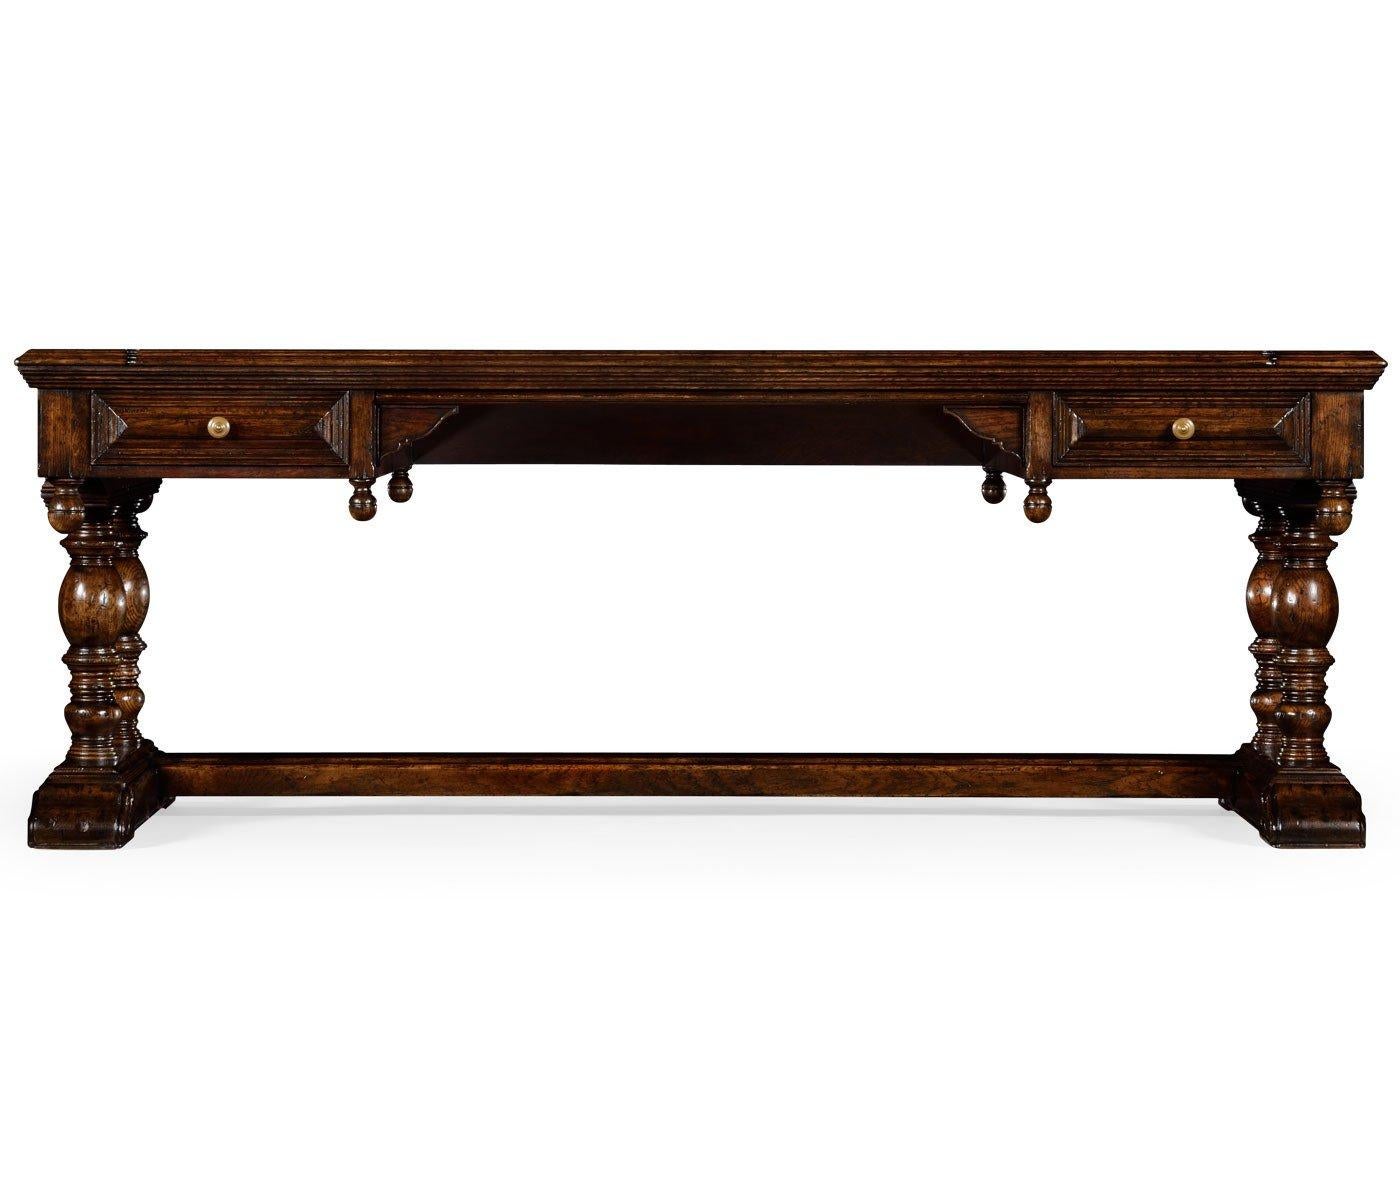 Large Elizabethan style dark oak distressed desk paneled sides and drawers, turned pendants, exposed butterfly joints to the top and an H-stretcher with carved volute feet.
Dimensions: 82